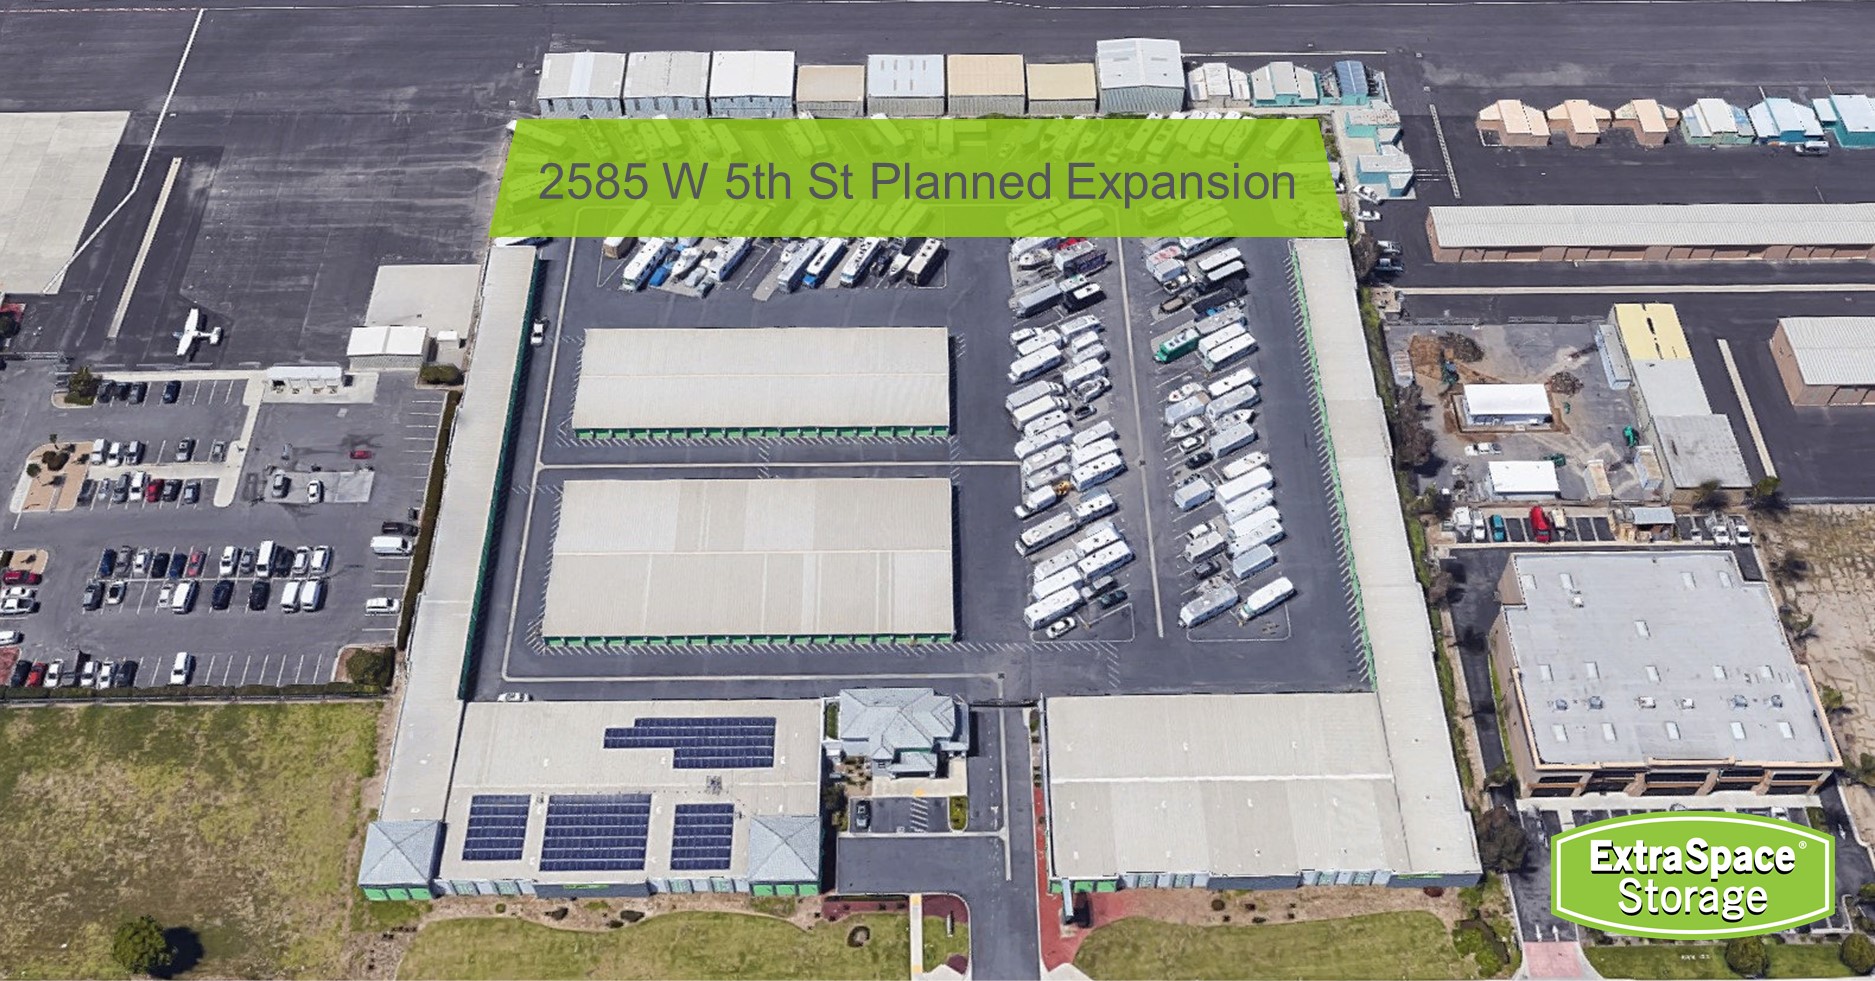 Expansion Plans for Extra Space Storage facility in Oxnard, CA